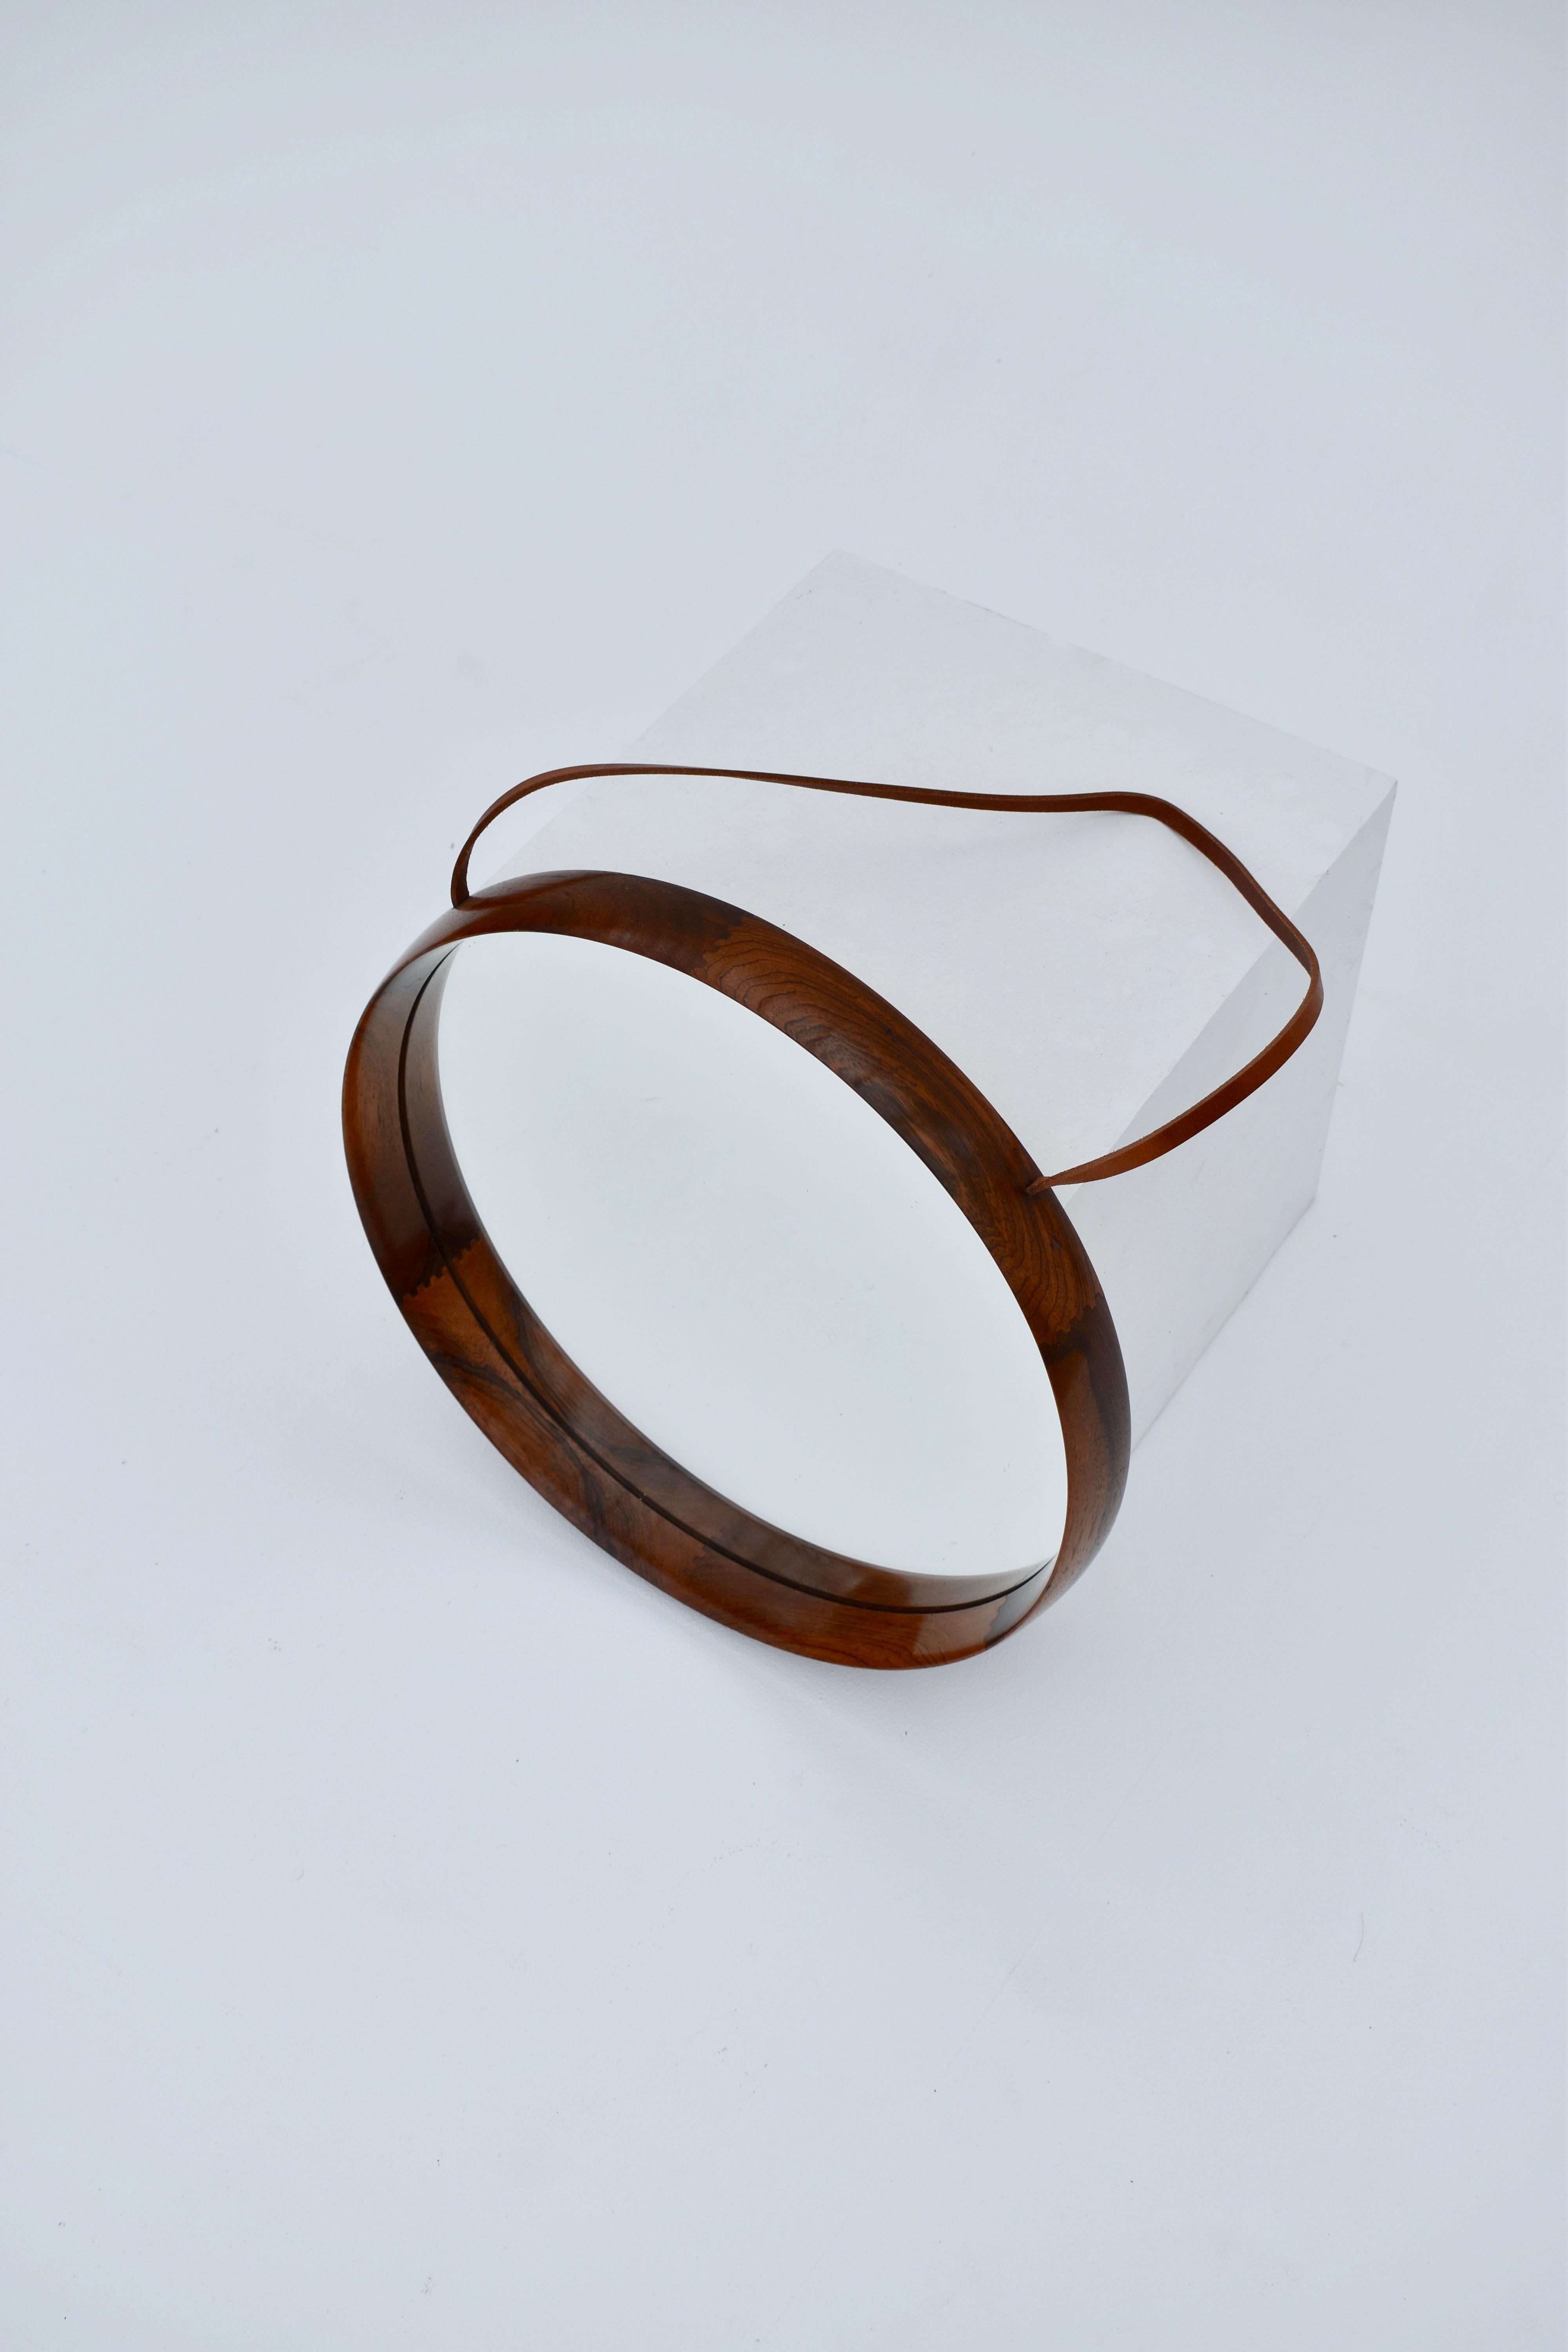 Brazilian Rosewood & Leather Wall Mirror by Uno & Östen Kristiansson for Luxus 1